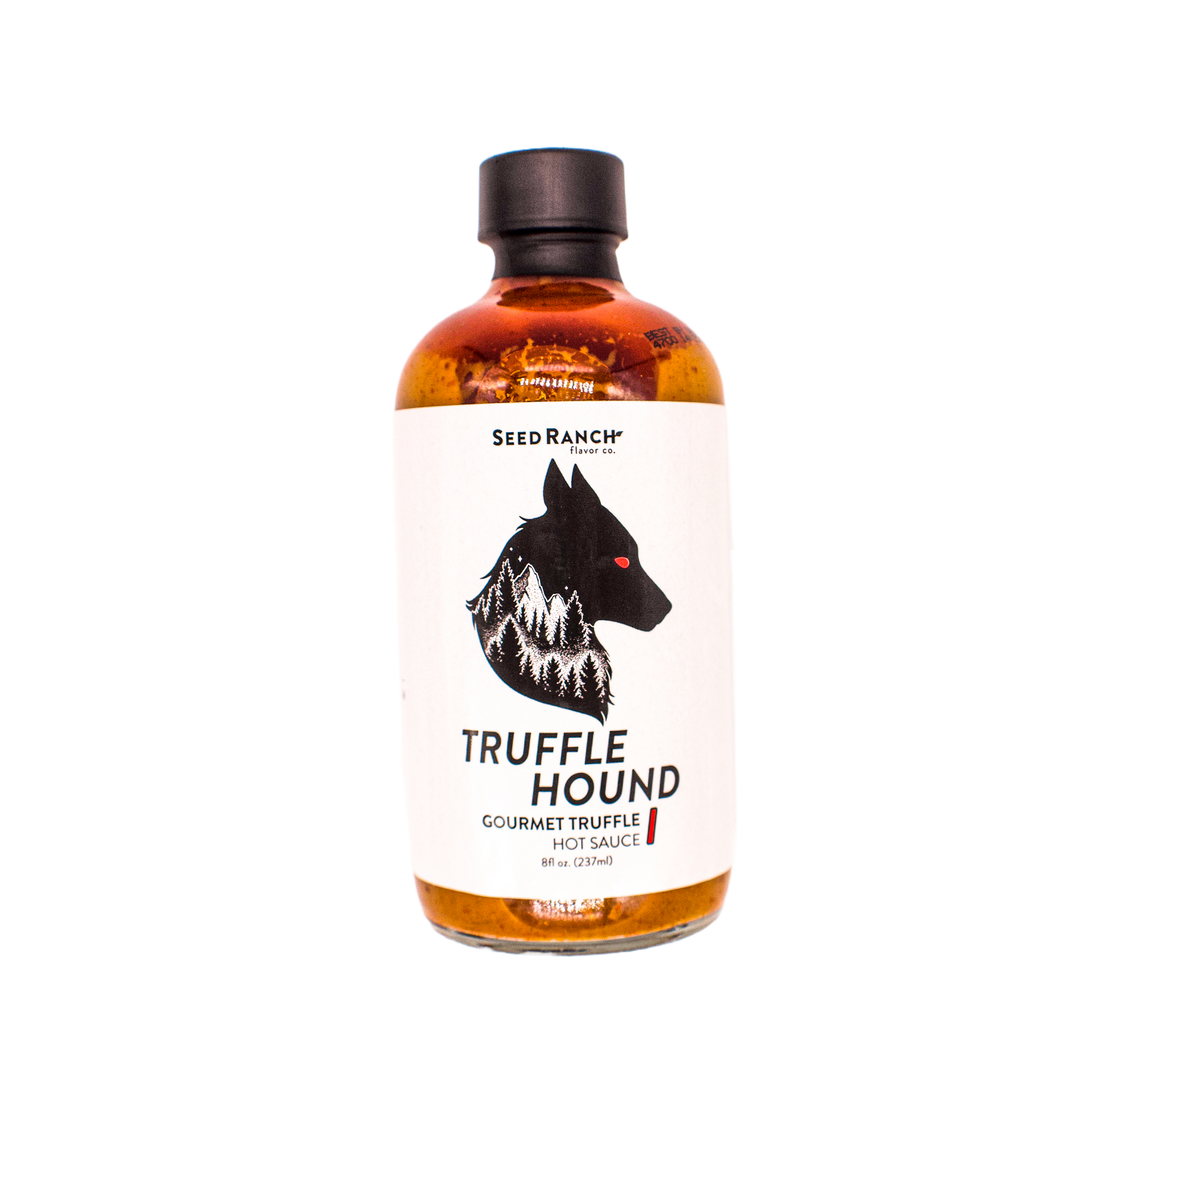 Seed Ranch Hot Sauce Truffle Hound